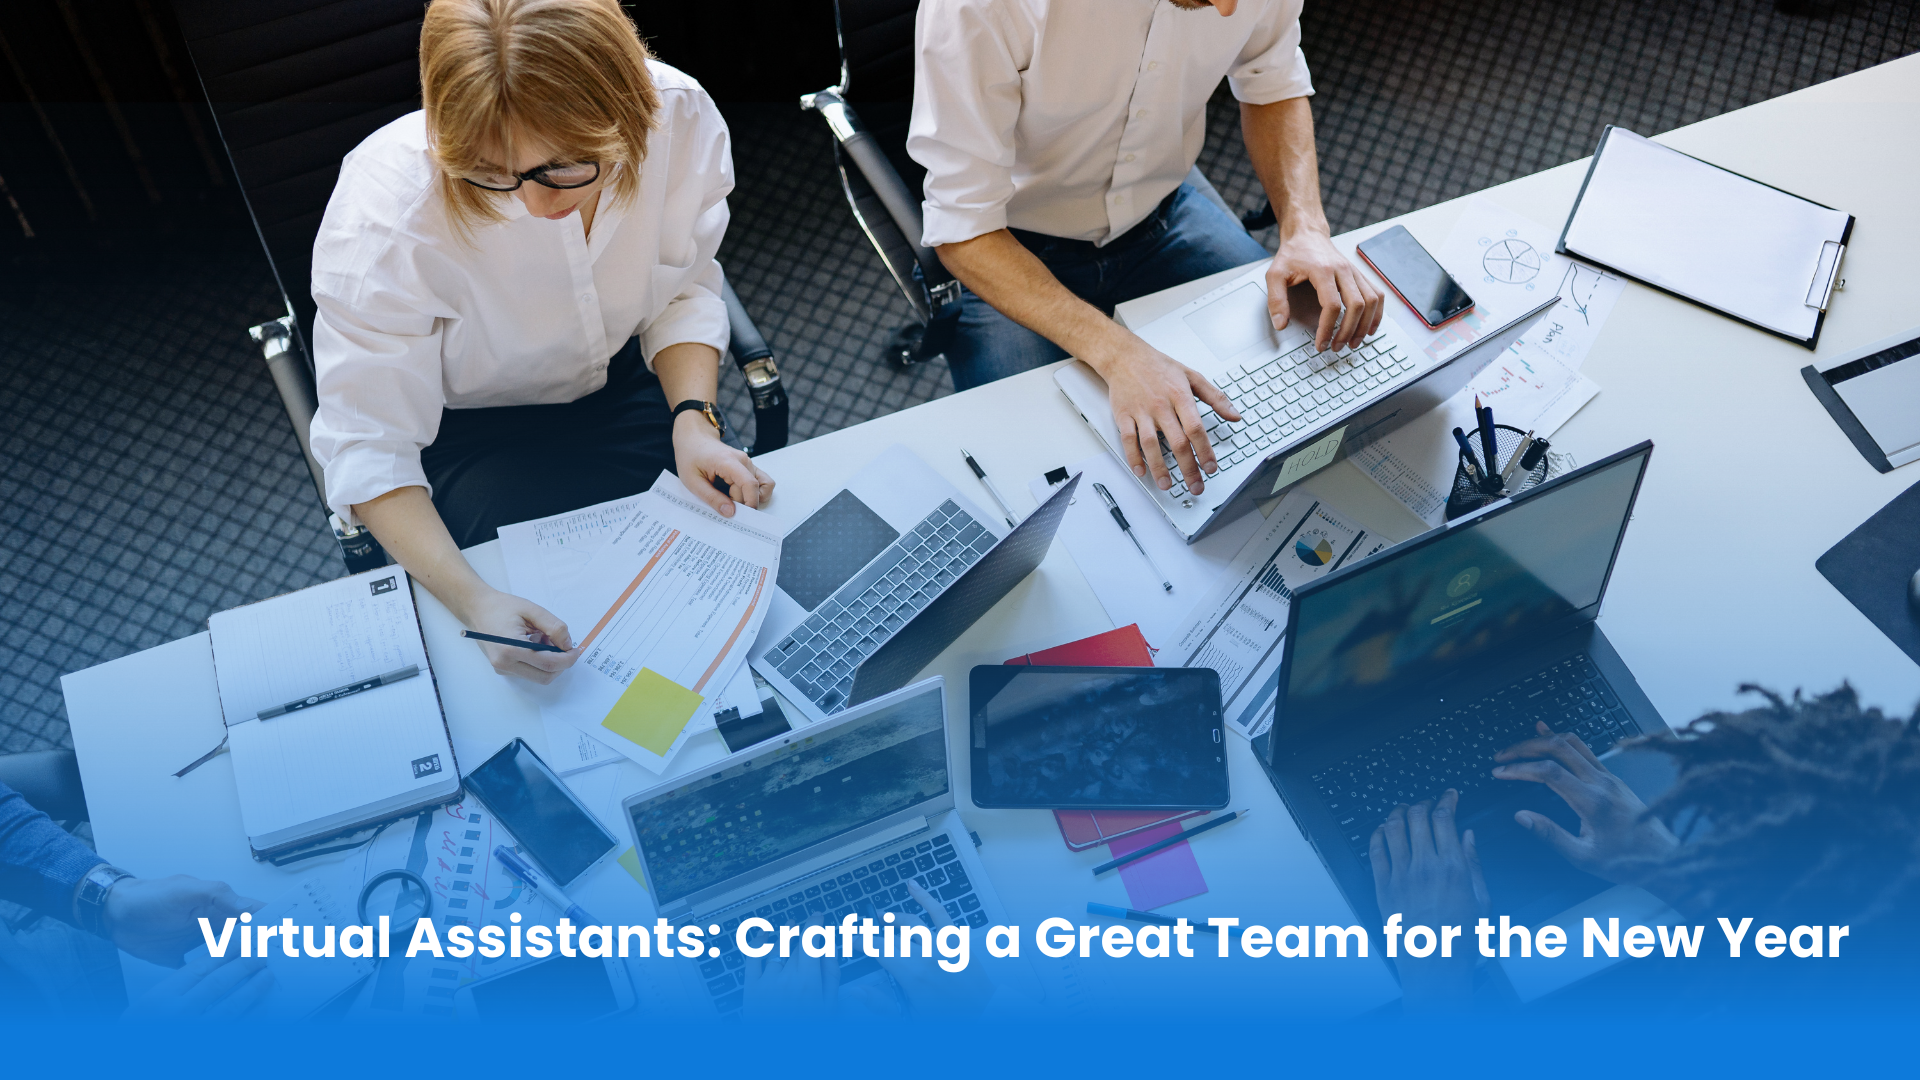 Virtual Assistants: Crafting a Great Team for the New Year